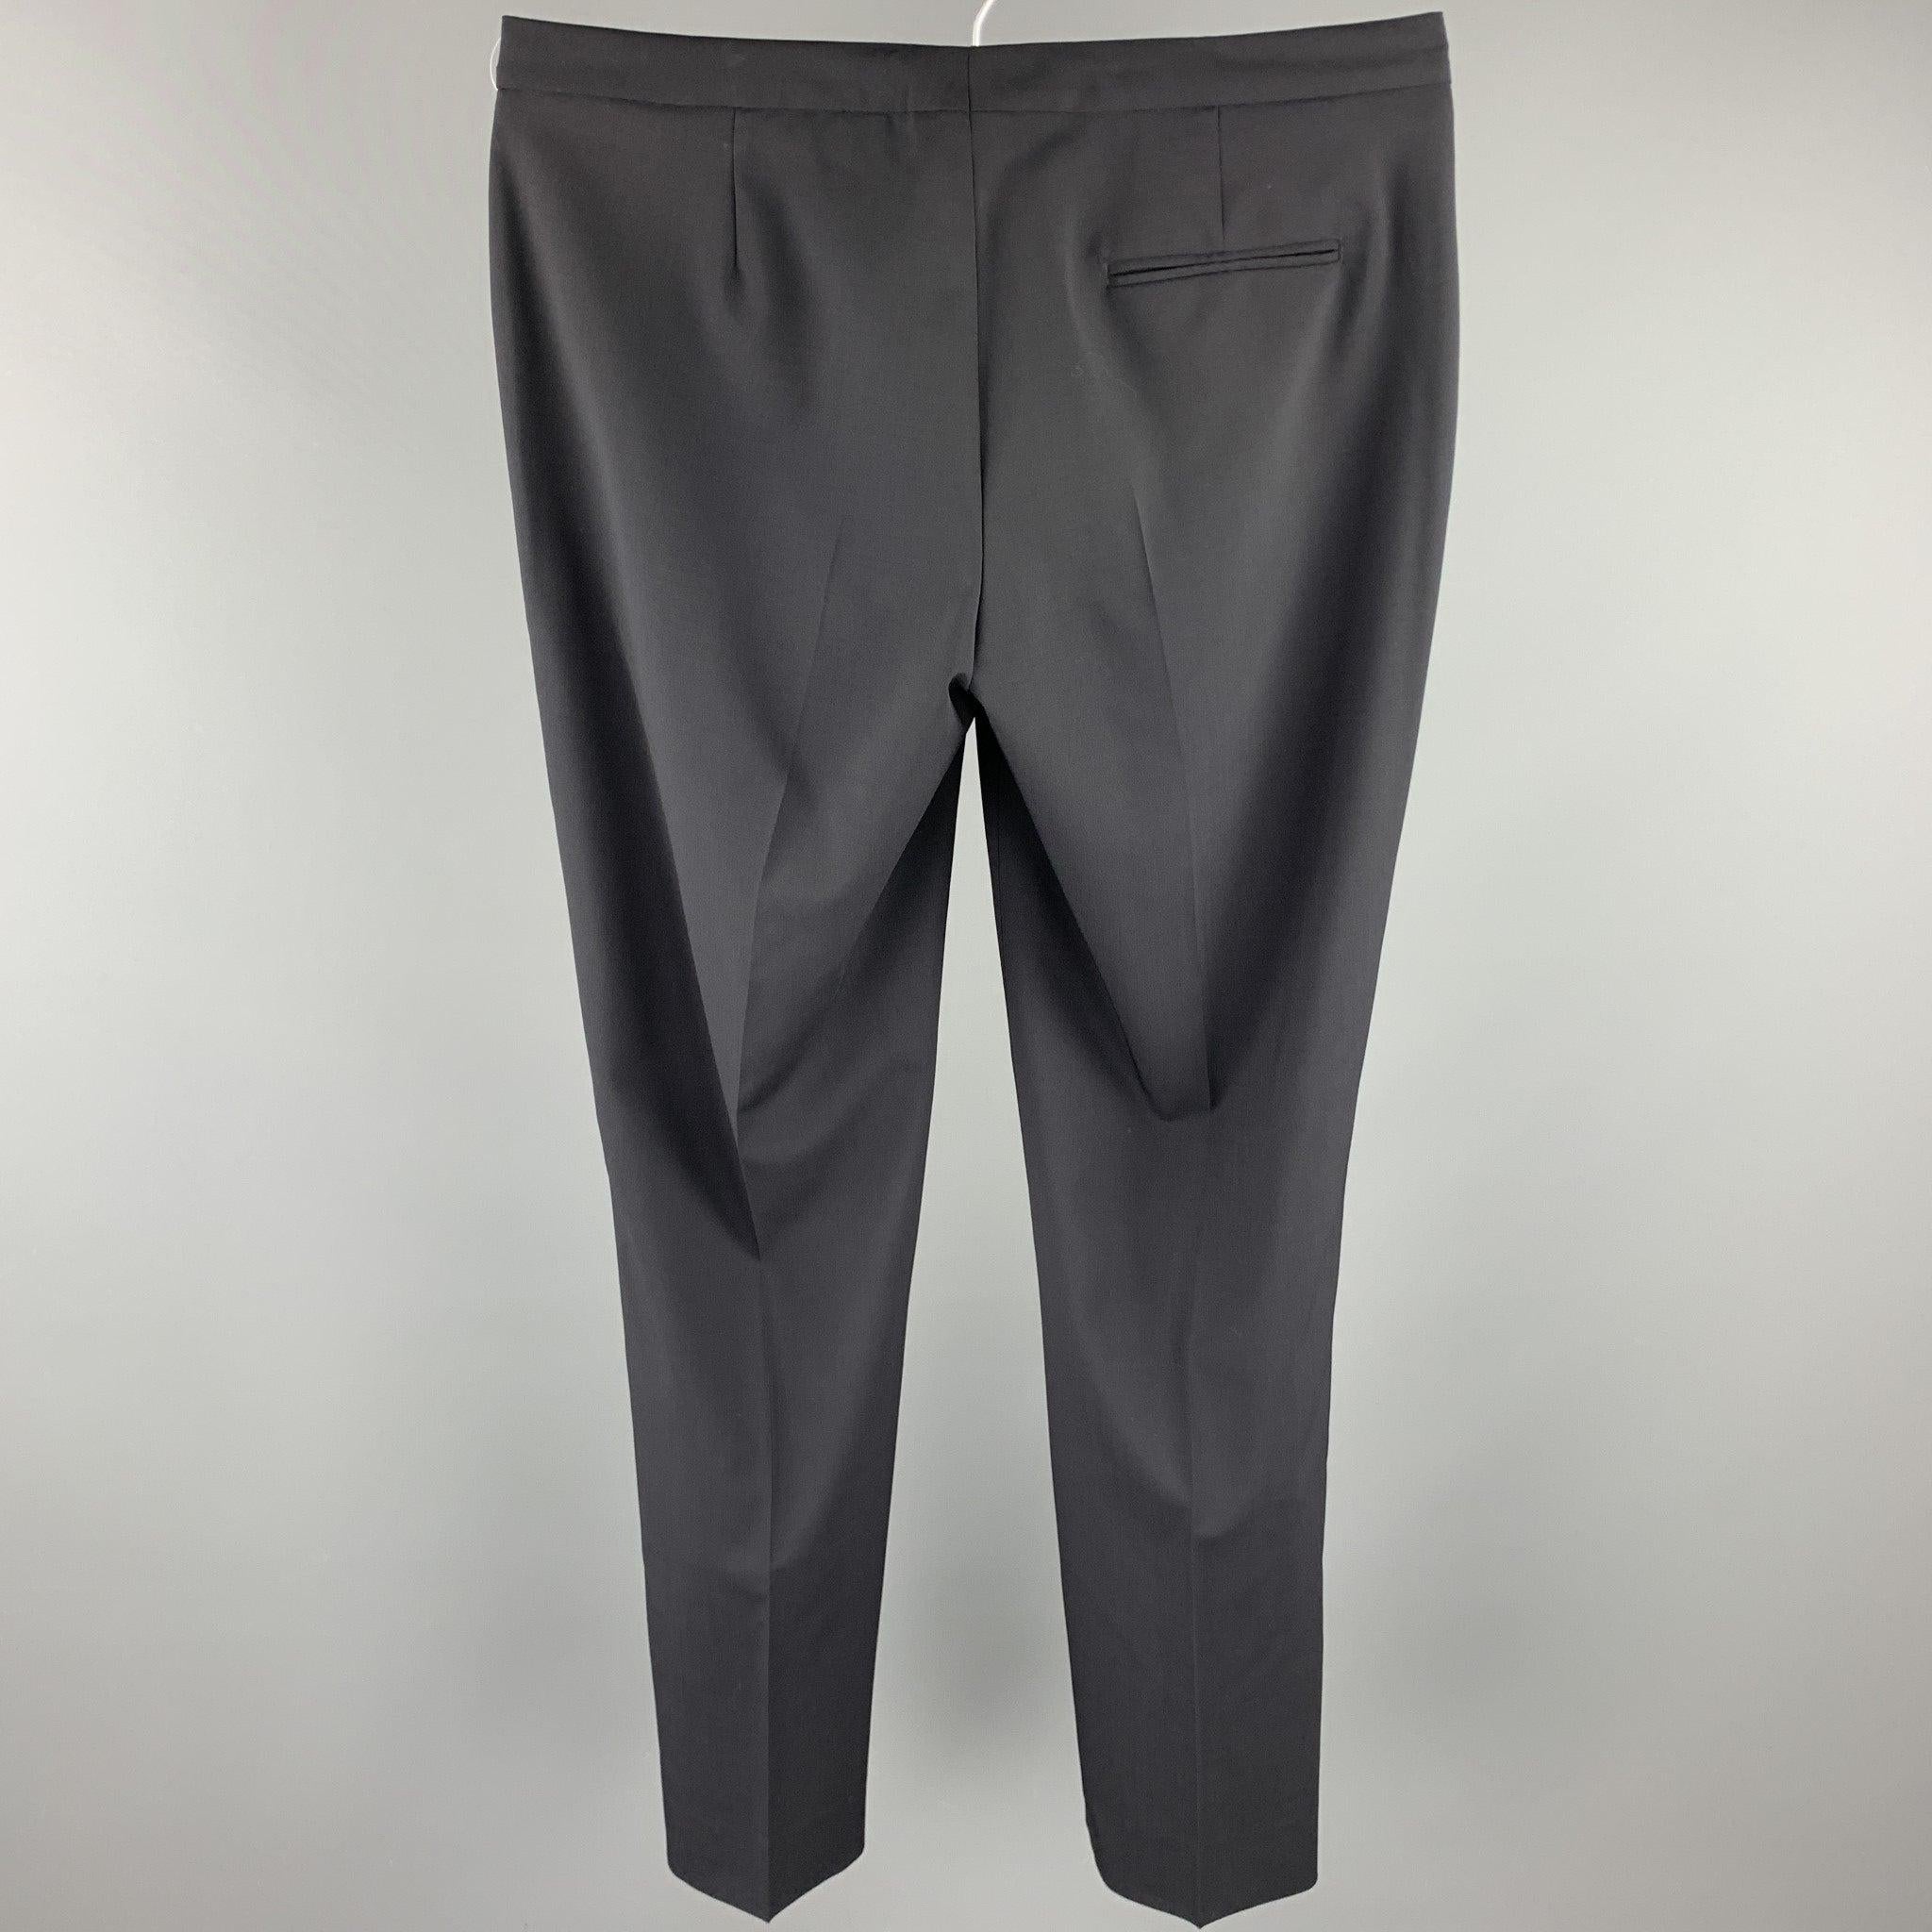 JIL SANDER Size 6 Black Straight Leg Dress Pants In Good Condition For Sale In San Francisco, CA